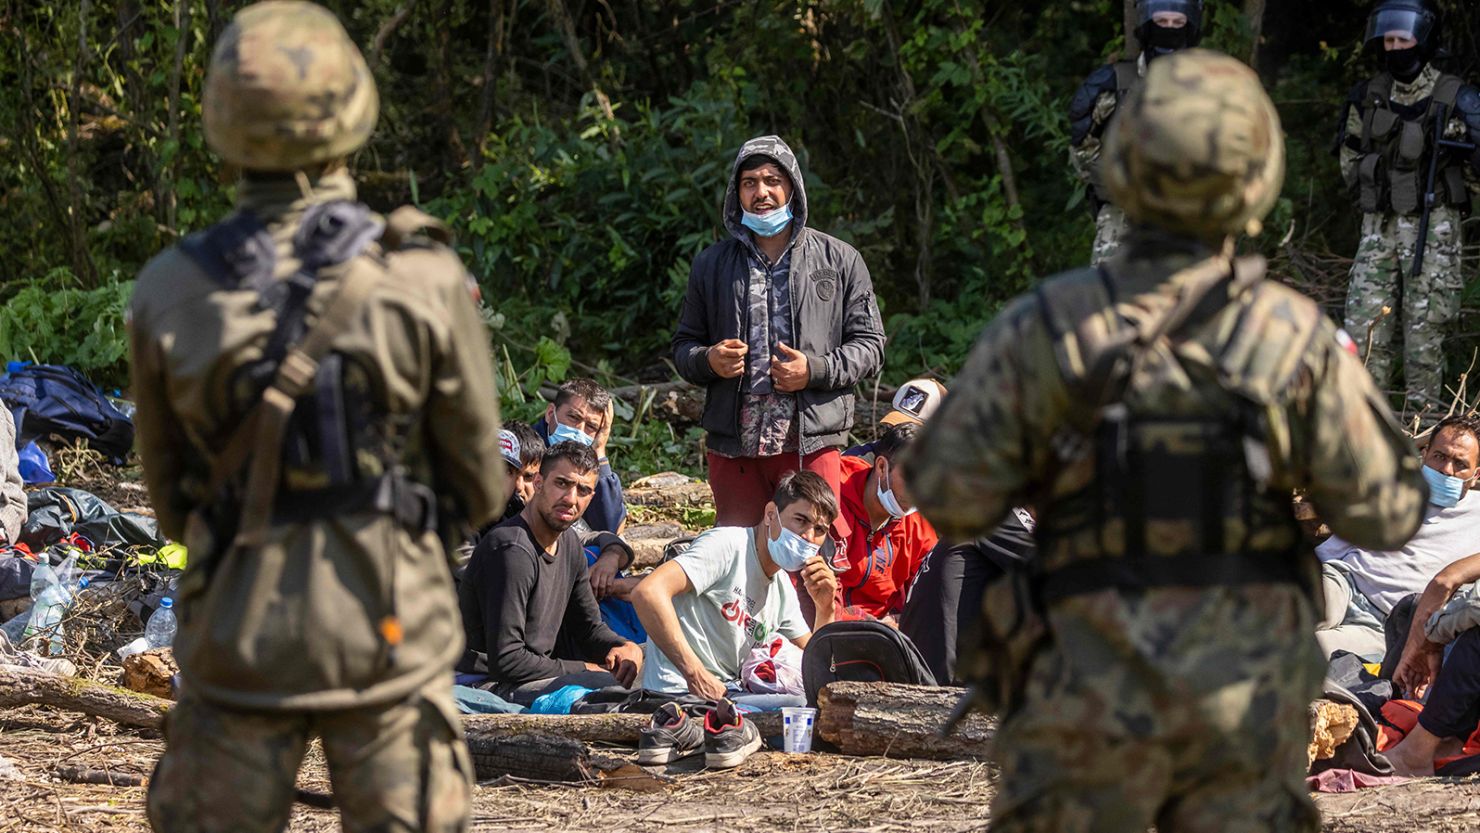 Polish and Belarusian border guards stand next to migrants sitting on the ground in the small Polish village of Usnarz Gorny near the border with Belarus, on August 20, 2021.